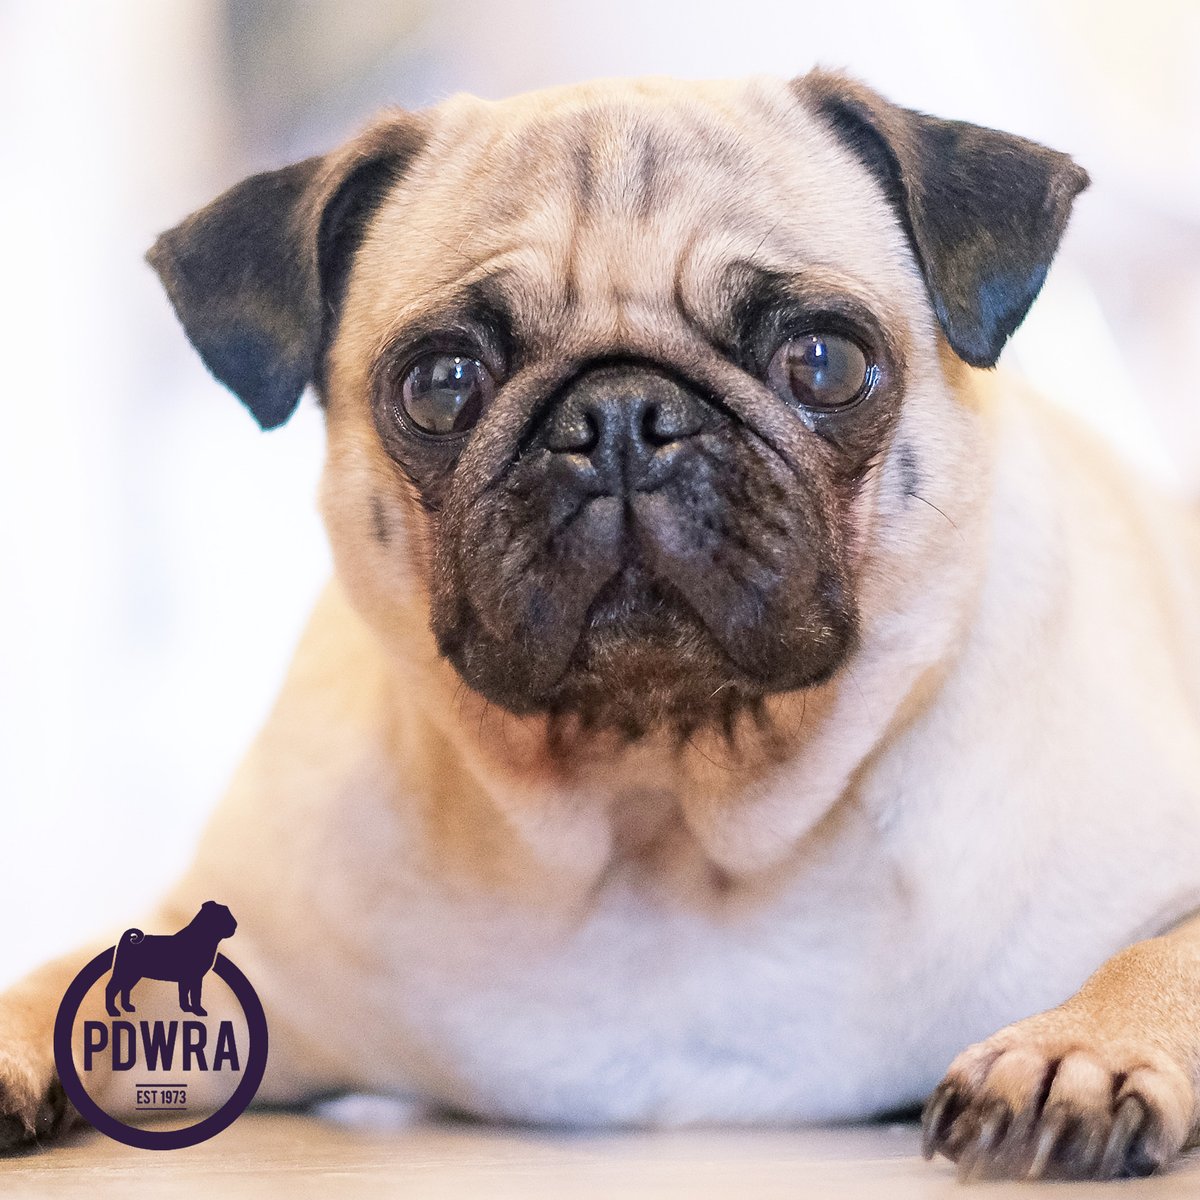 Following the Christmas closure to new adopter applications, the PDWRA is now open again to anyone interested in adopting our rescued pugs! If you’d like to apply, just click here –
ecs.page.link/kbBU3
#pdwra #pugcharity #pugwelfare #friendsofwelfare #pugadoption #pugs